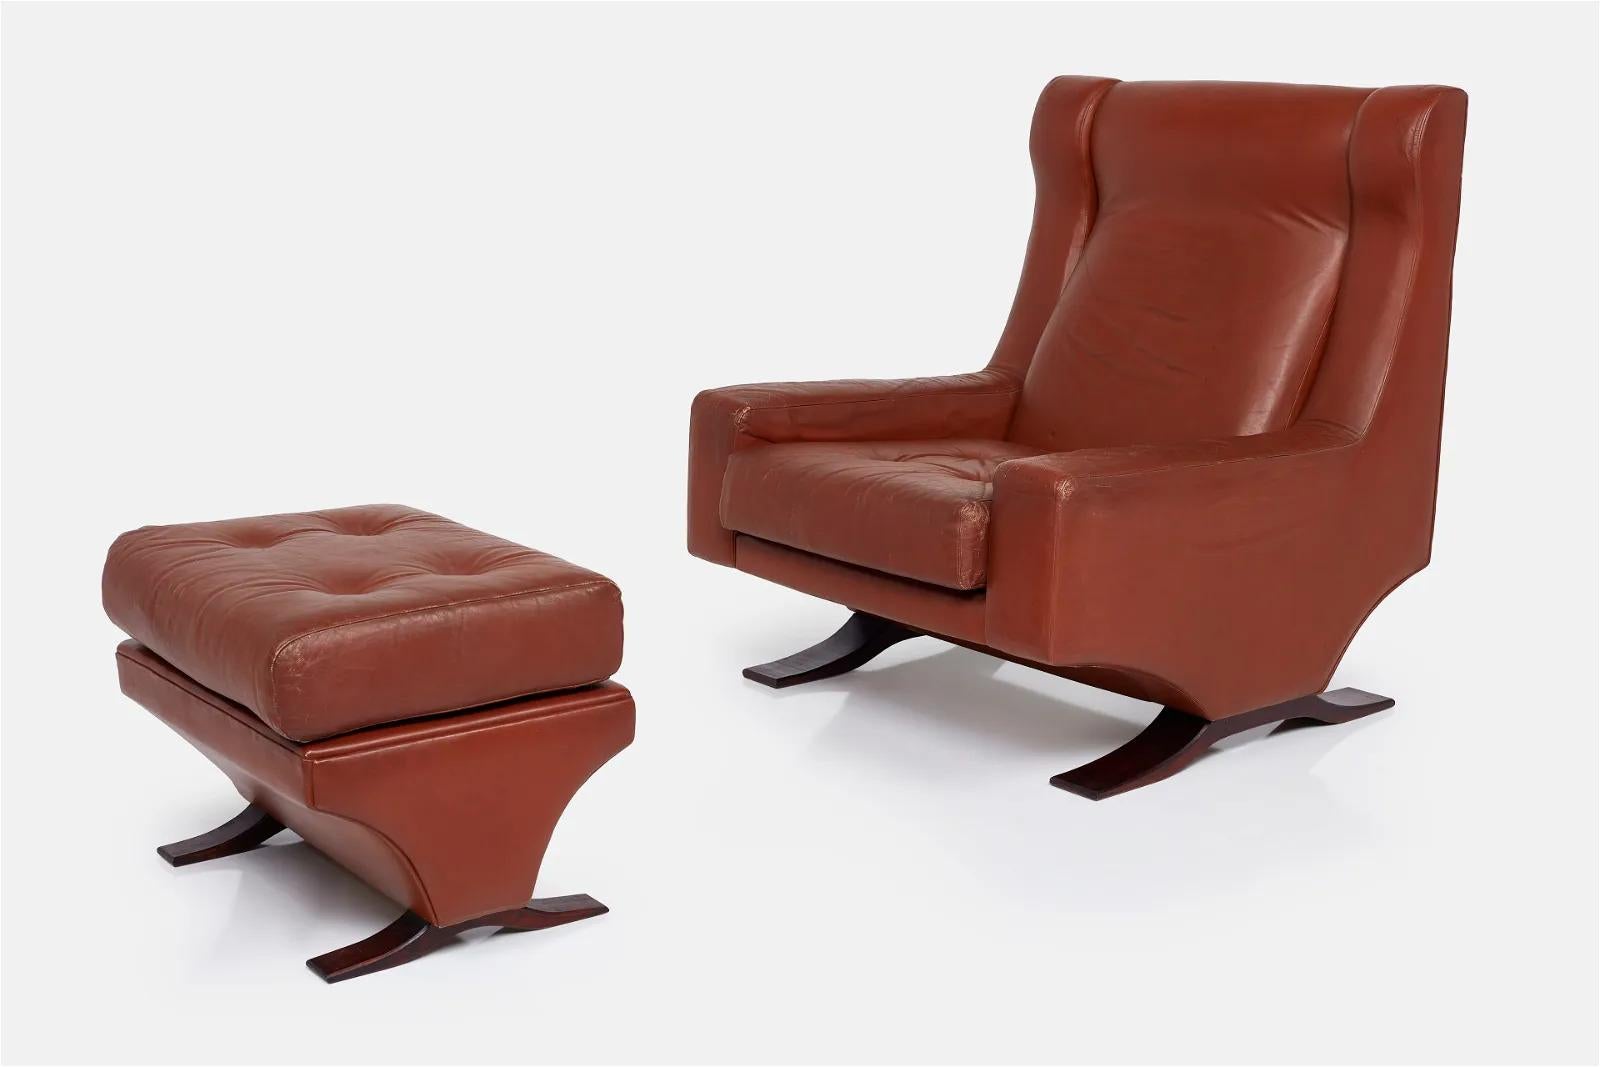 For sale is a remarkable, authentically vintage 'Magister' Lounge Chair and Ottoman set designed by the renowned Italian designer Franz Sartori for Flexform. This iconic mid-century modern set, a real collector's item, embodies the rich history and